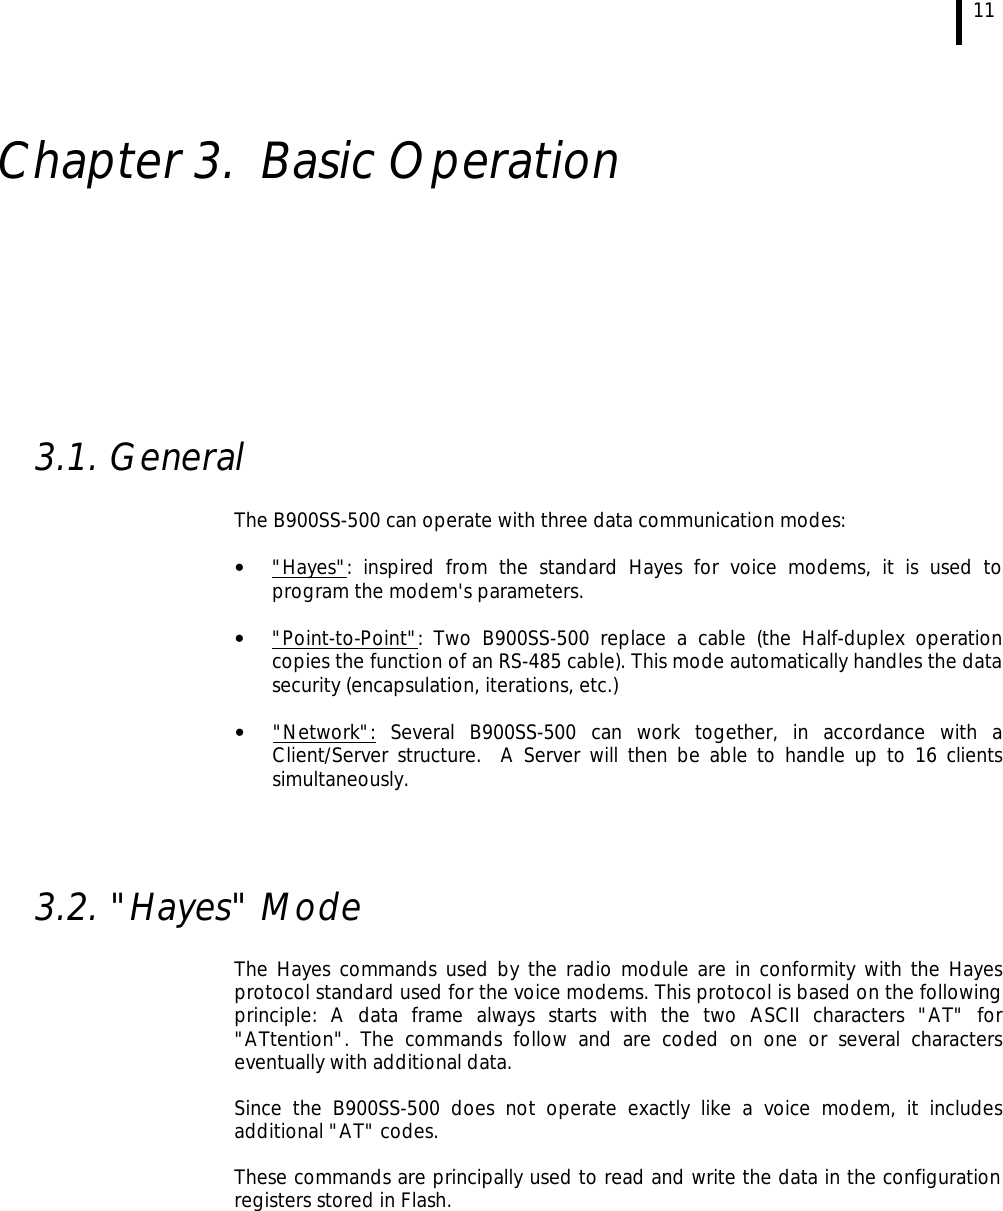  11   Chapter 3. Basic Operation          3.1. General  The B900SS-500 can operate with three data communication modes:  • &quot;Hayes&quot;: inspired from the standard Hayes for voice modems, it is used to program the modem&apos;s parameters.  • &quot;Point-to-Point&quot;: Two B900SS-500 replace a cable (the Half-duplex operation copies the function of an RS-485 cable). This mode automatically handles the data security (encapsulation, iterations, etc.)  • &quot;Network&quot;: Several B900SS-500 can work together, in accordance with a Client/Server structure.  A Server will then be able to handle up to 16 clients simultaneously.     3.2. &quot;Hayes&quot; Mode   The Hayes commands used by the radio module are in conformity with the Hayes protocol standard used for the voice modems. This protocol is based on the following principle: A data frame always starts with the two ASCII characters &quot;AT&quot; for &quot;ATtention&quot;. The commands follow and are coded on one or several characters eventually with additional data.  Since the B900SS-500 does not operate exactly like a voice modem, it includes additional &quot;AT&quot; codes.  These commands are principally used to read and write the data in the configuration registers stored in Flash. 